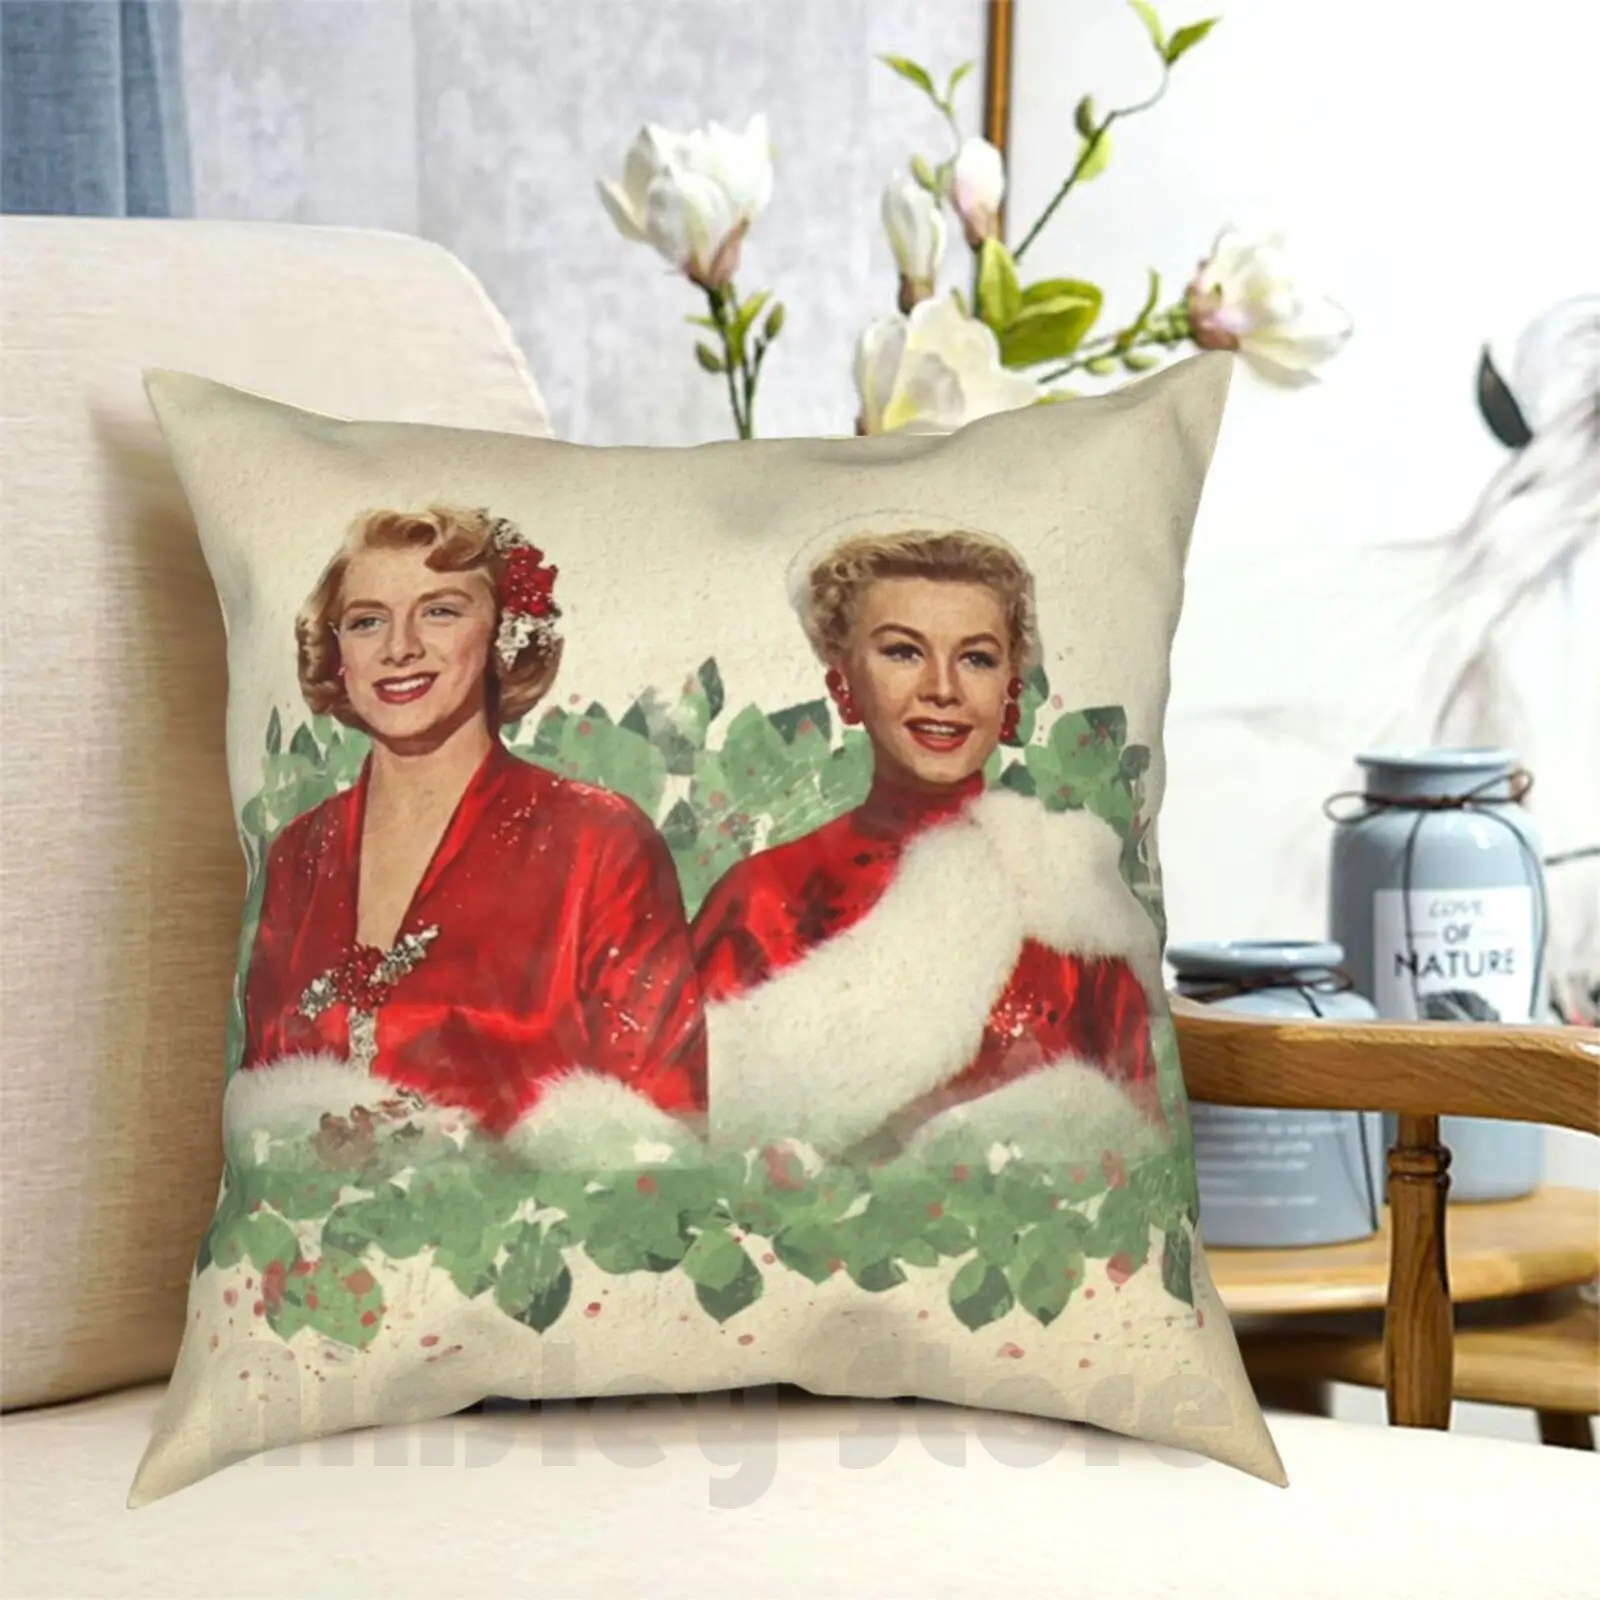 Sisters-A Merry White Christmas Pillow Case Printed Home Soft DIY Pillow cover Old Hollywood Rosemary Clooney White